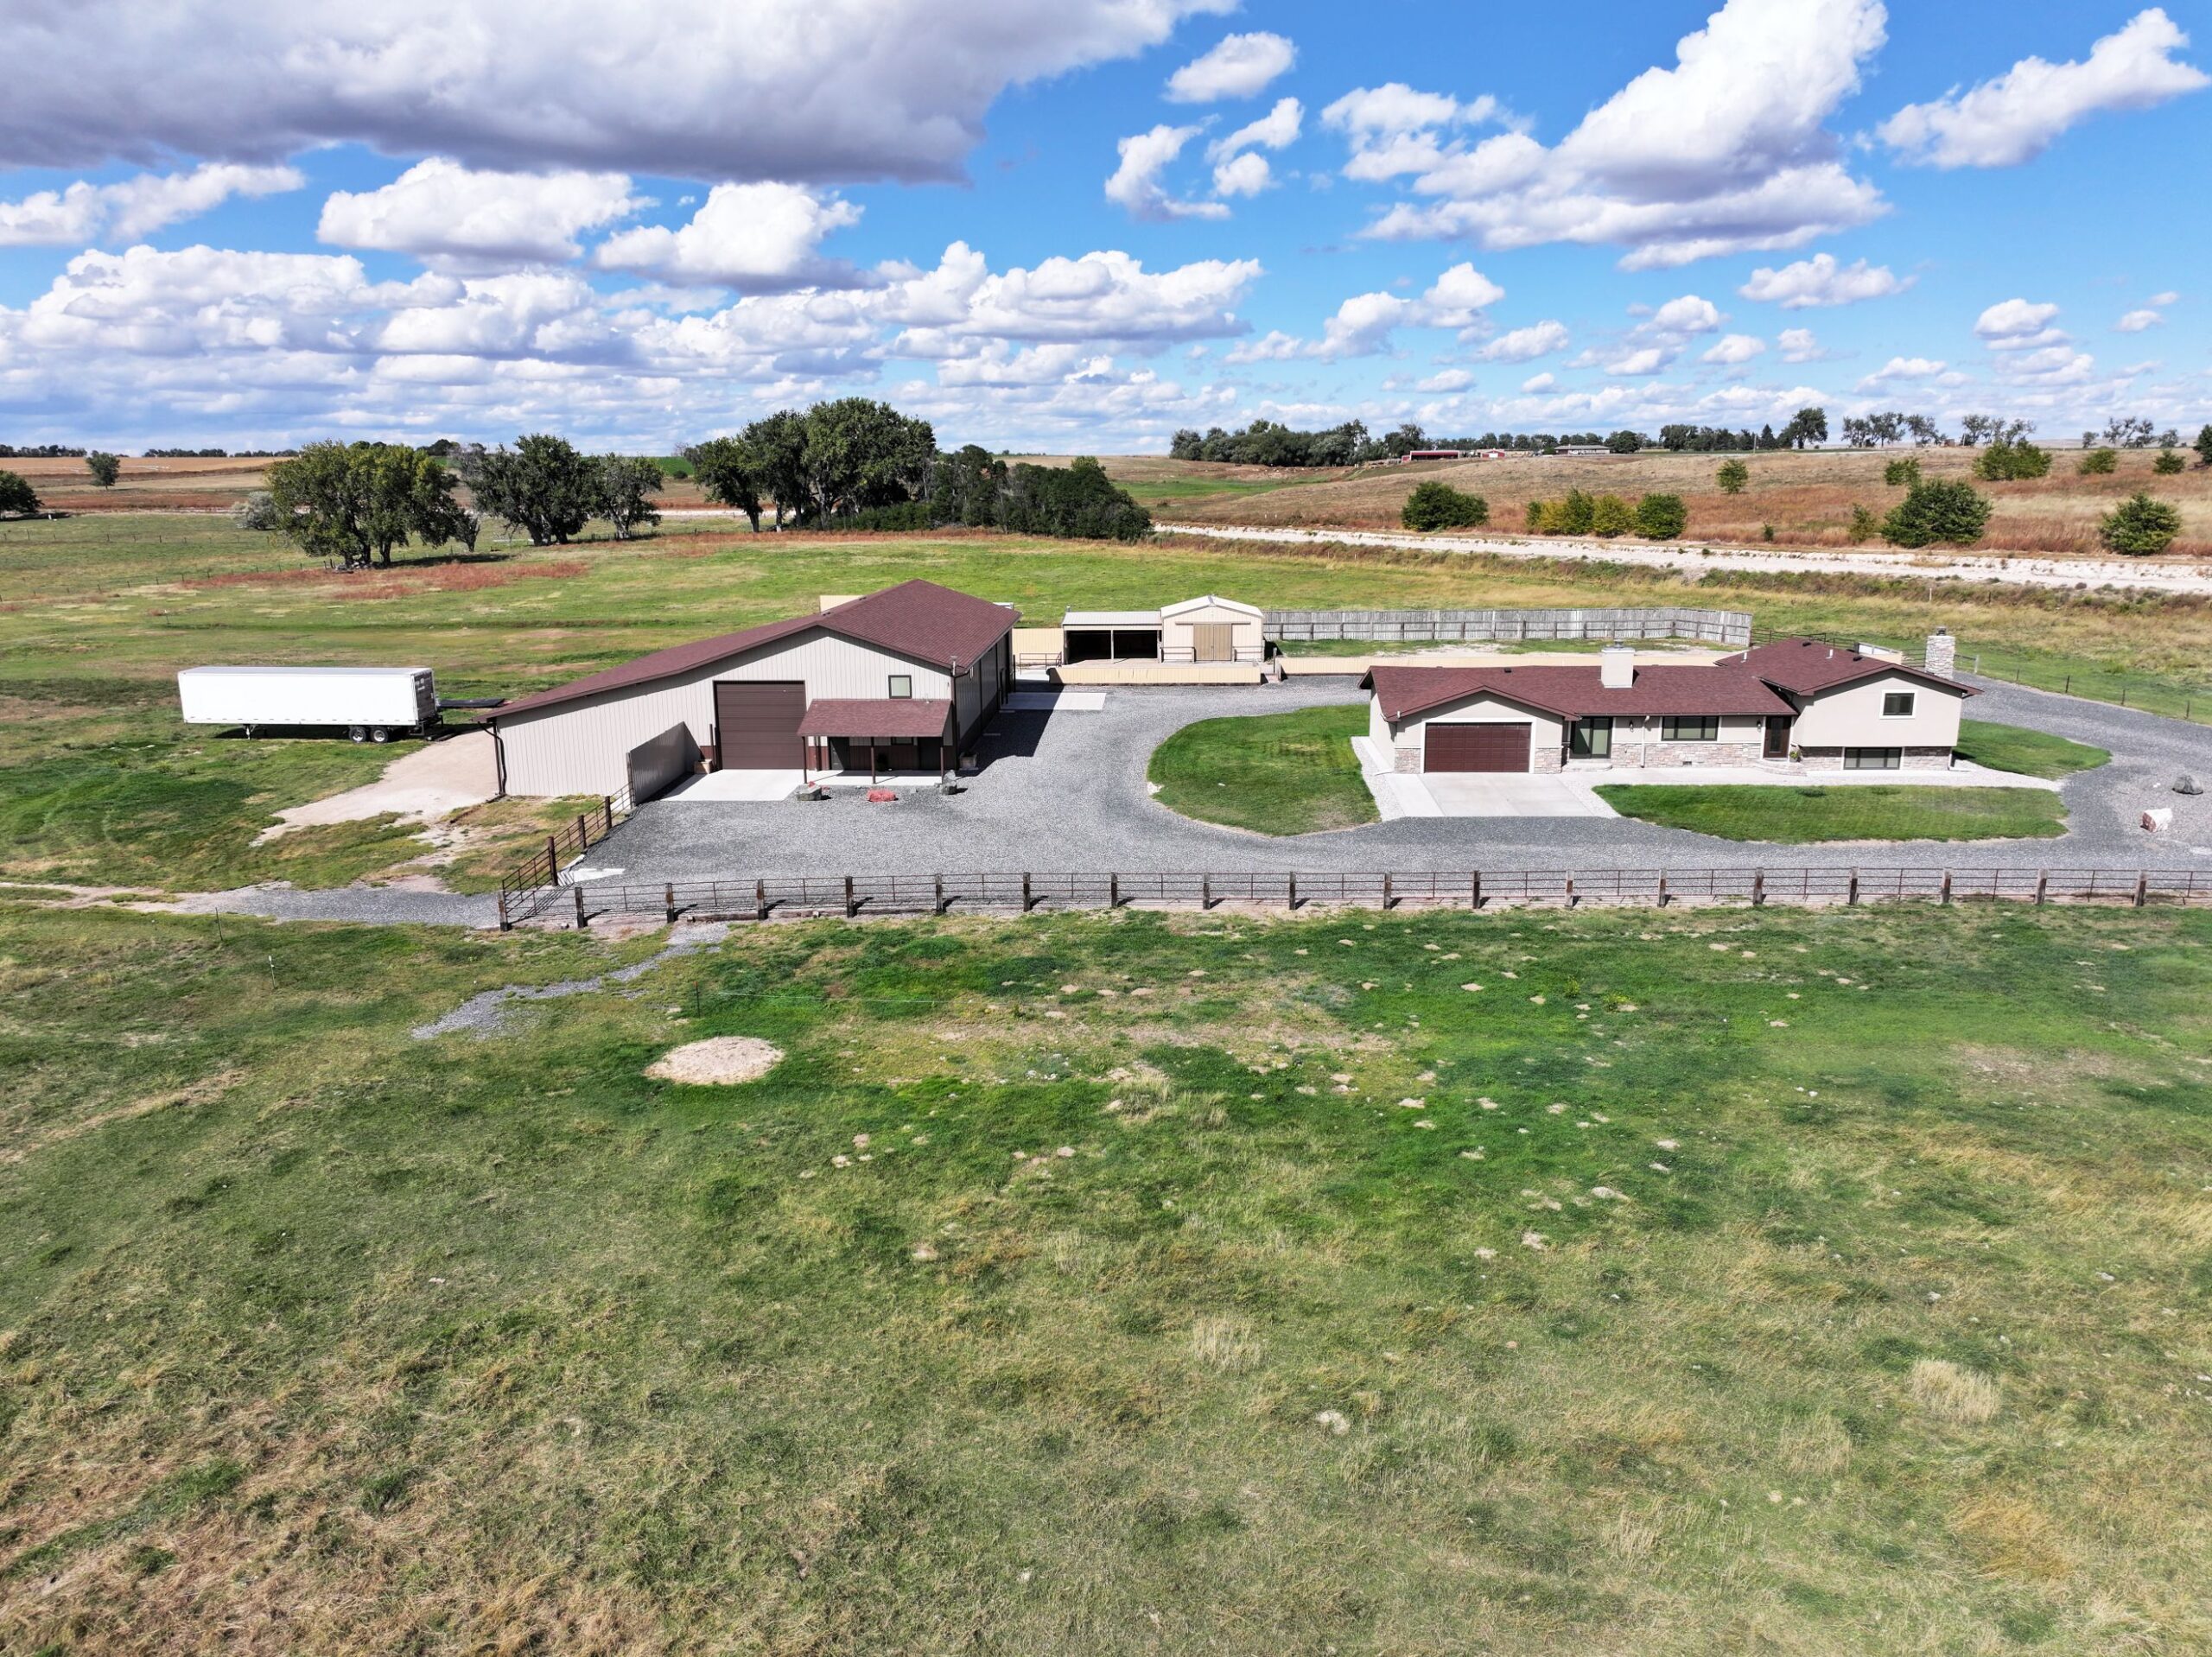 Horse property for sale Scotts Bluff County, NE